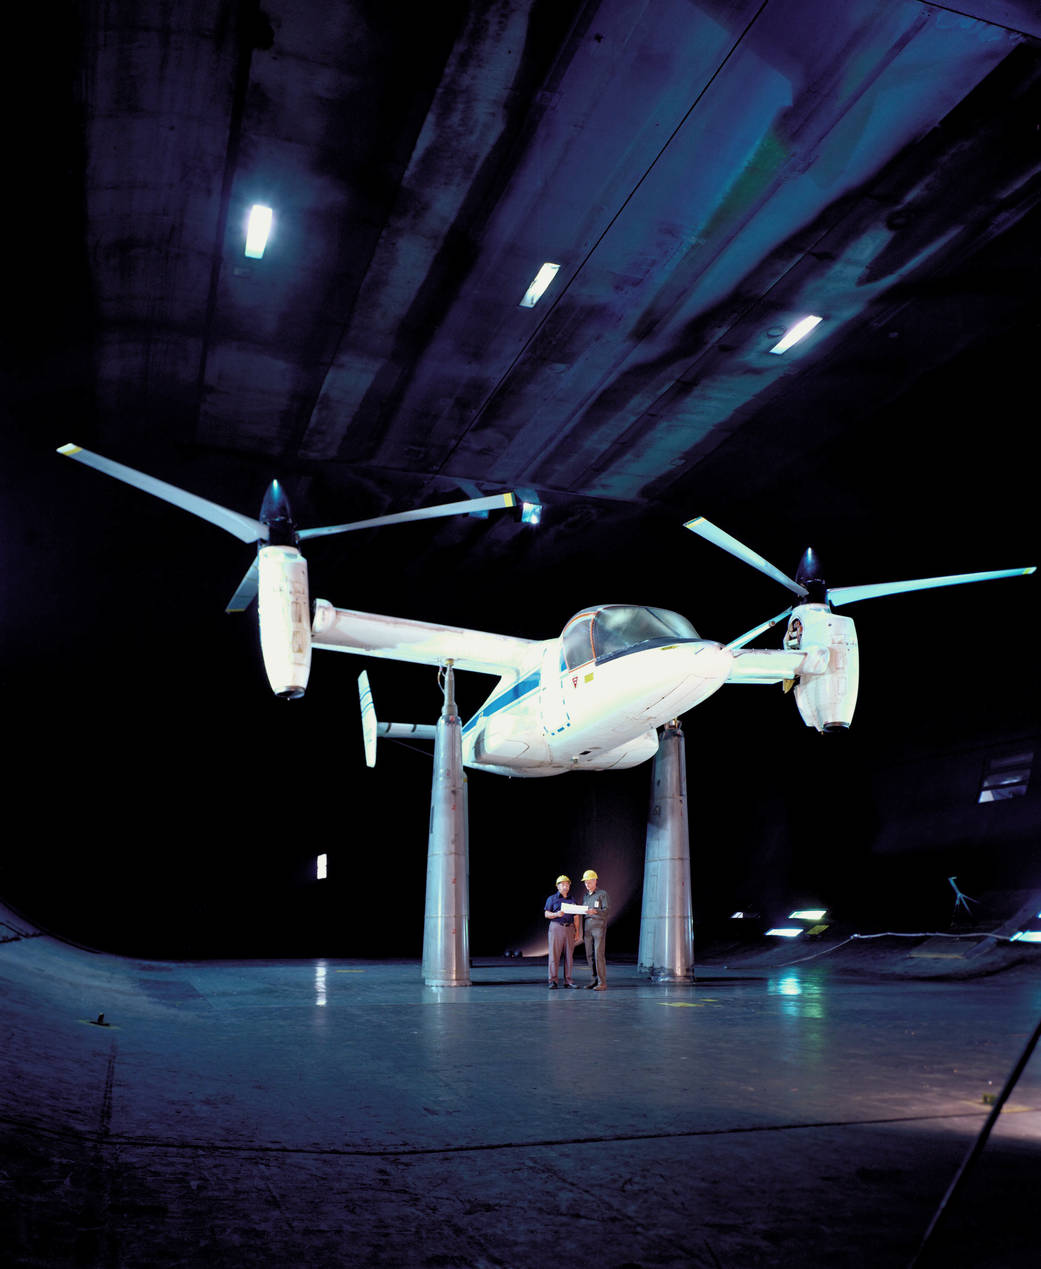 Tiltrotor aircraft in 40-foot-by-80-foot test section